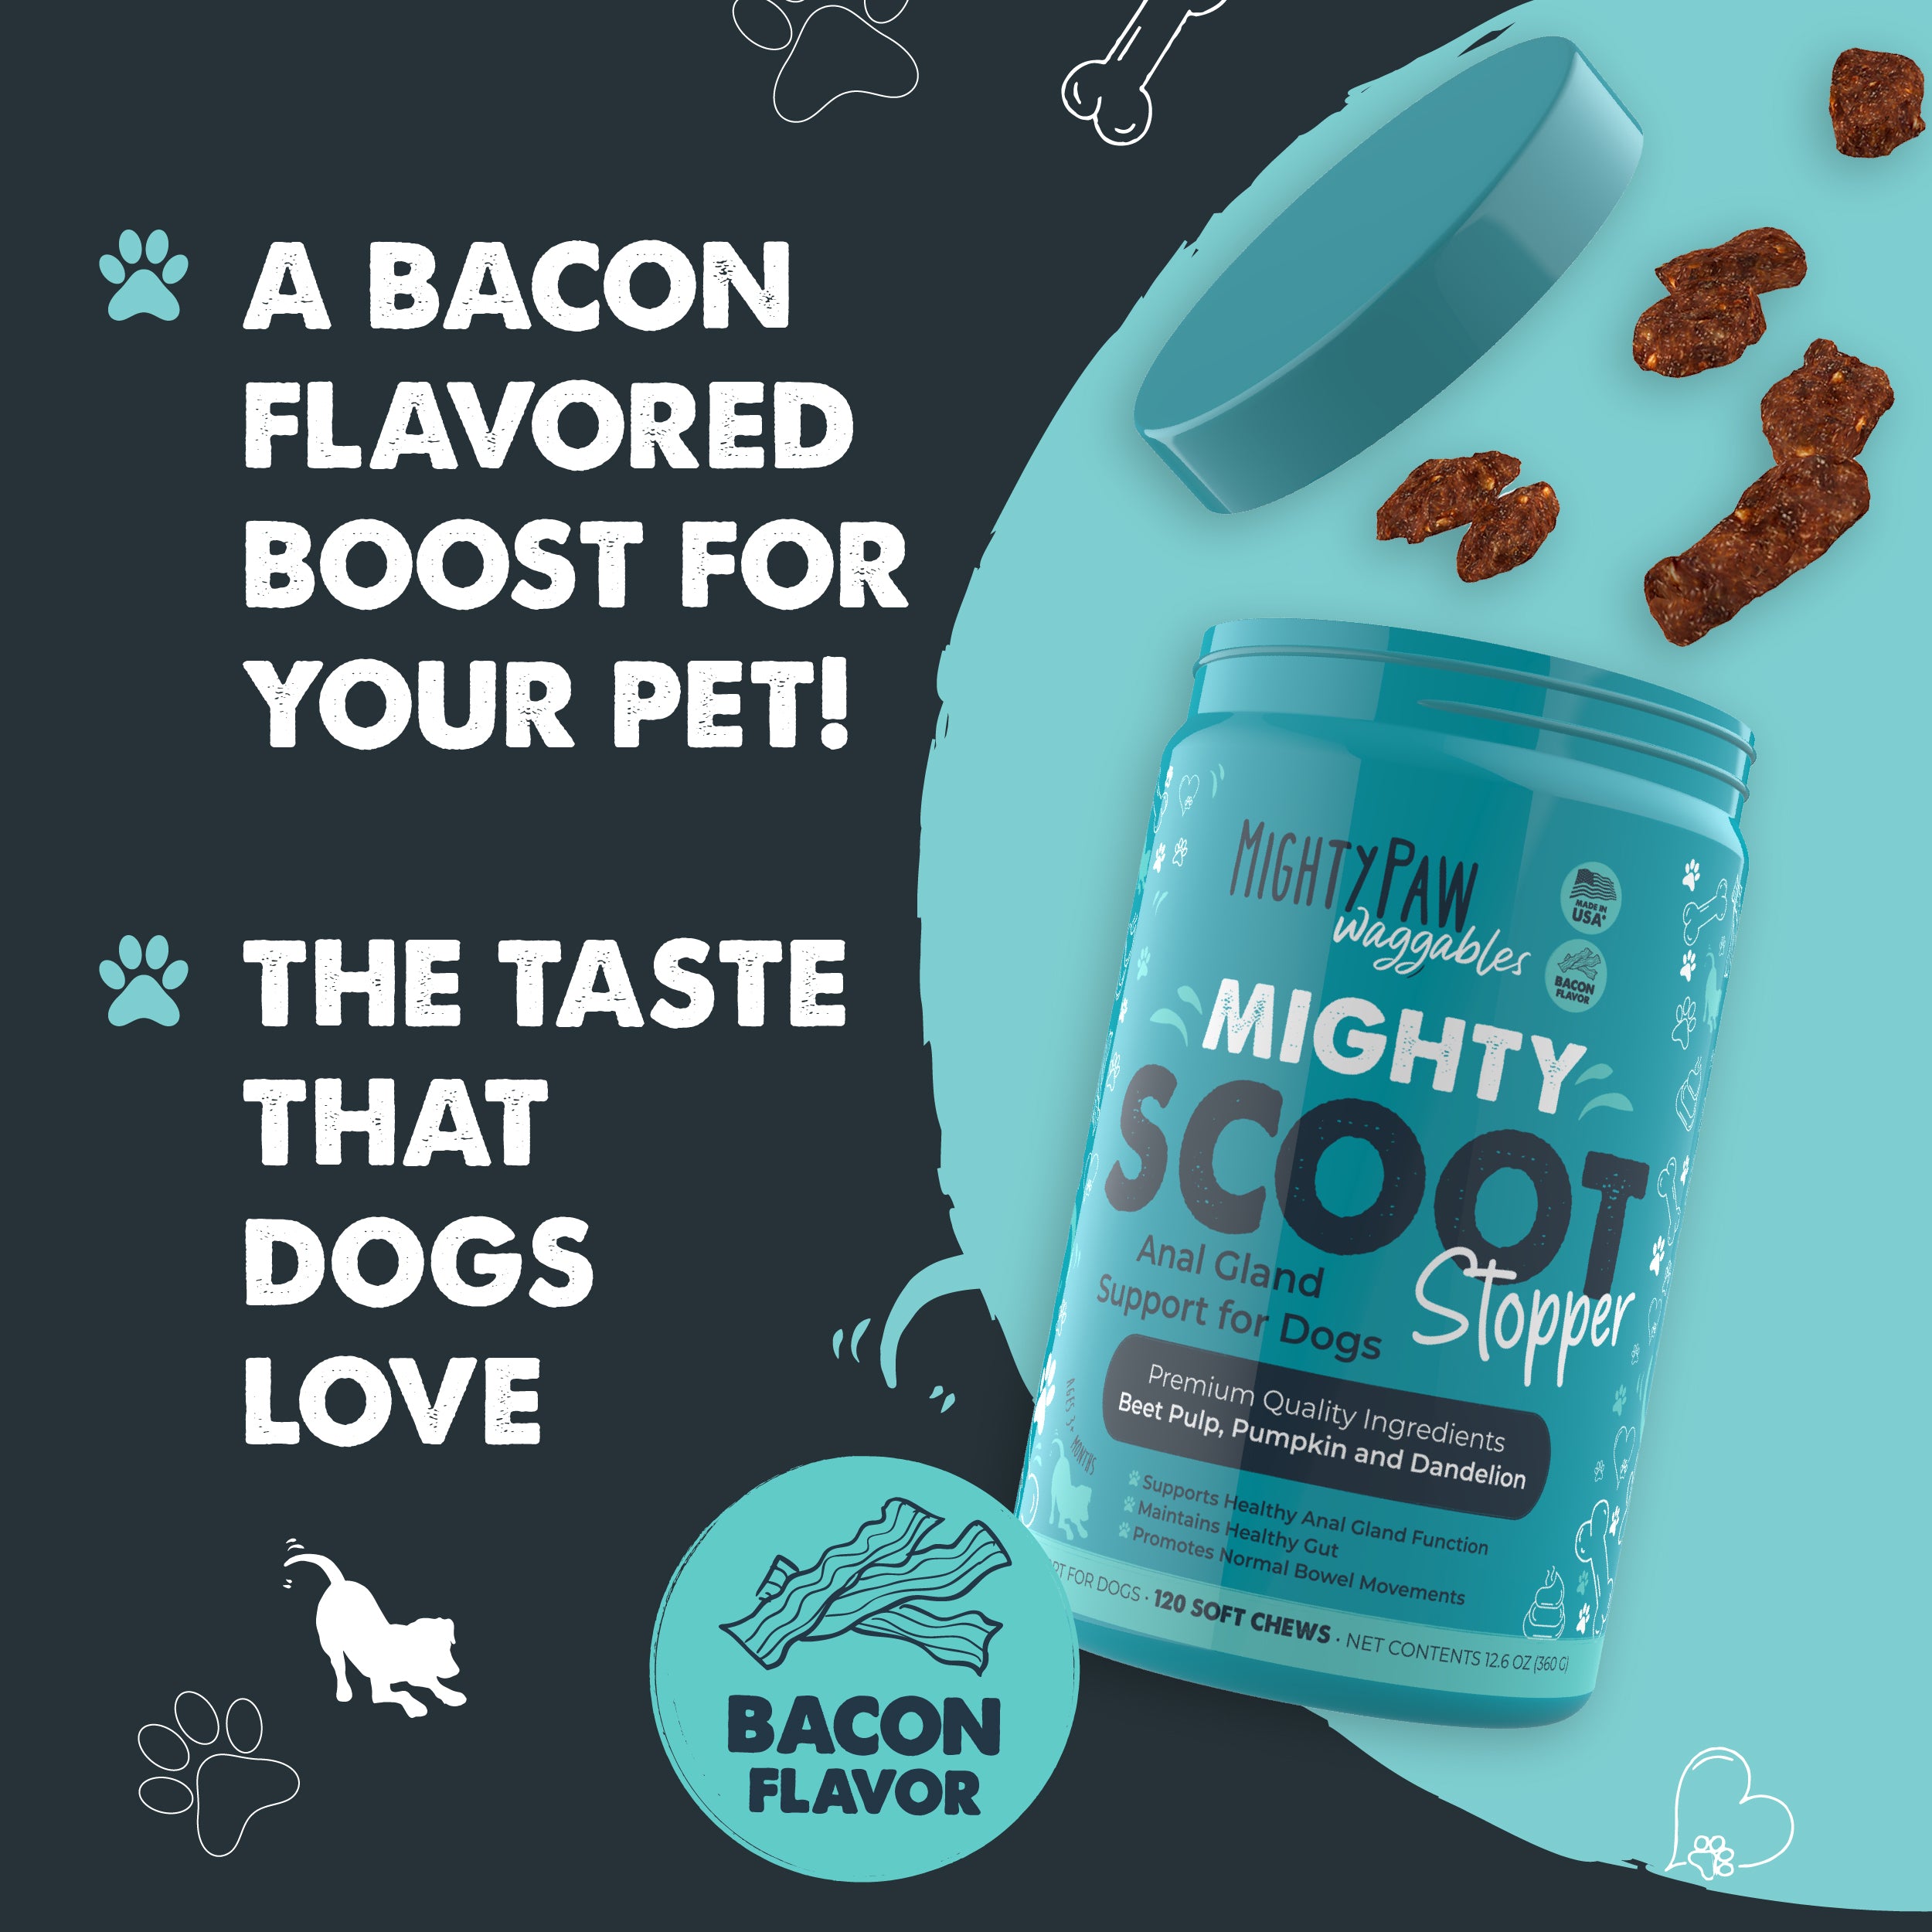 Mighty Paw Scoot Stopper Chews for Healthy Digestion and Anal Gland Support